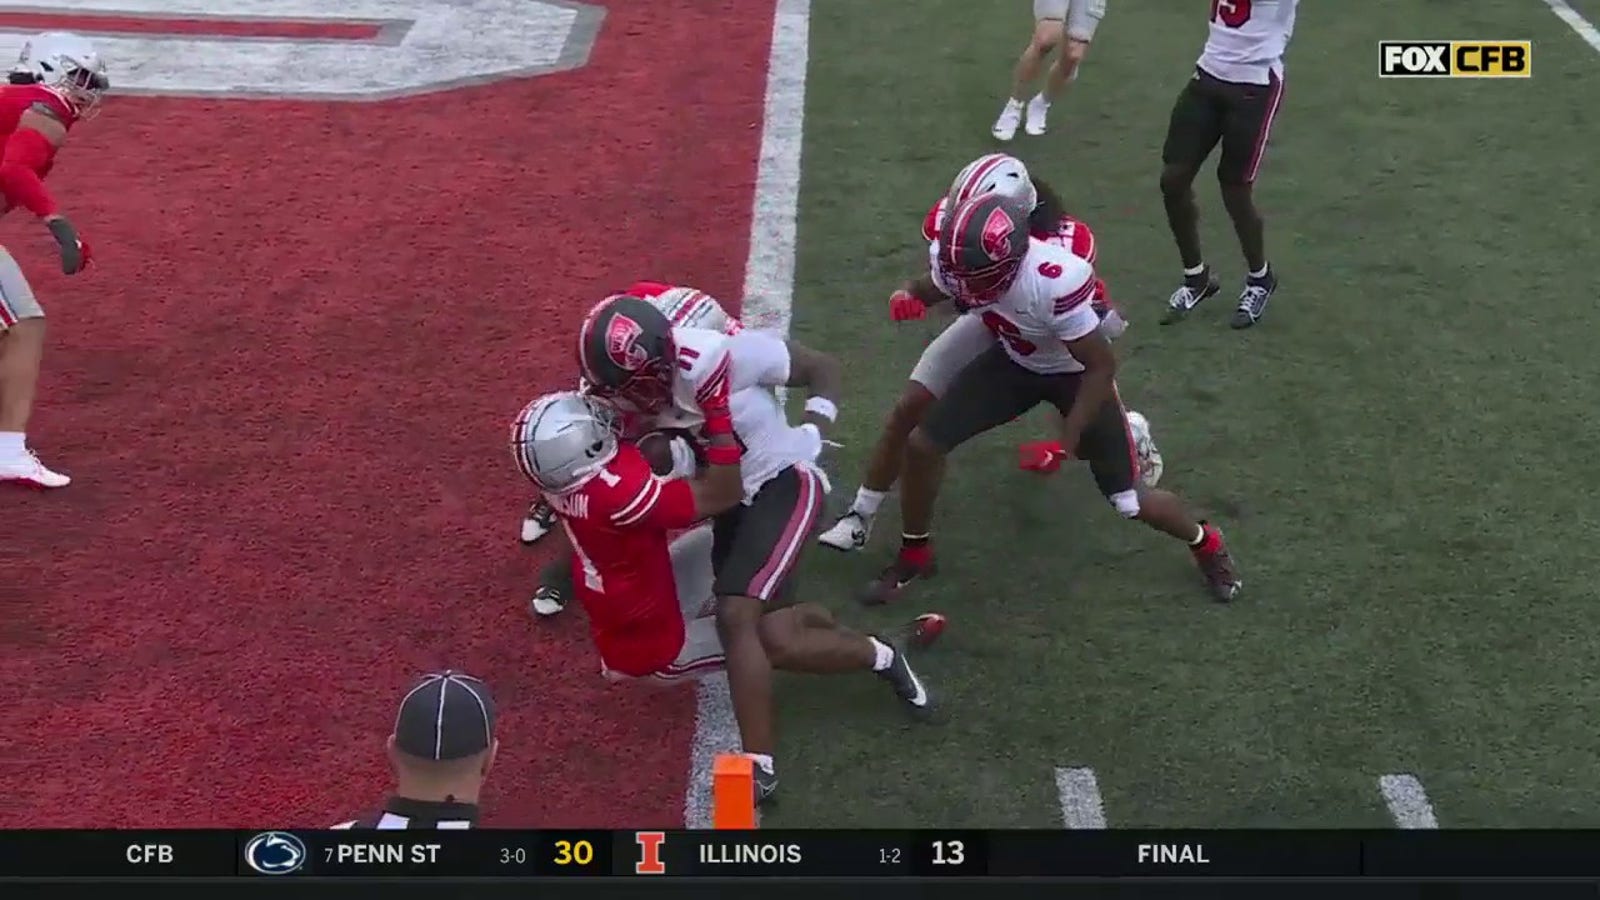 Western Kentucky's Austin Reed connects with Malachi Corley for a two-yard touchdown, trimming Ohio State's lead